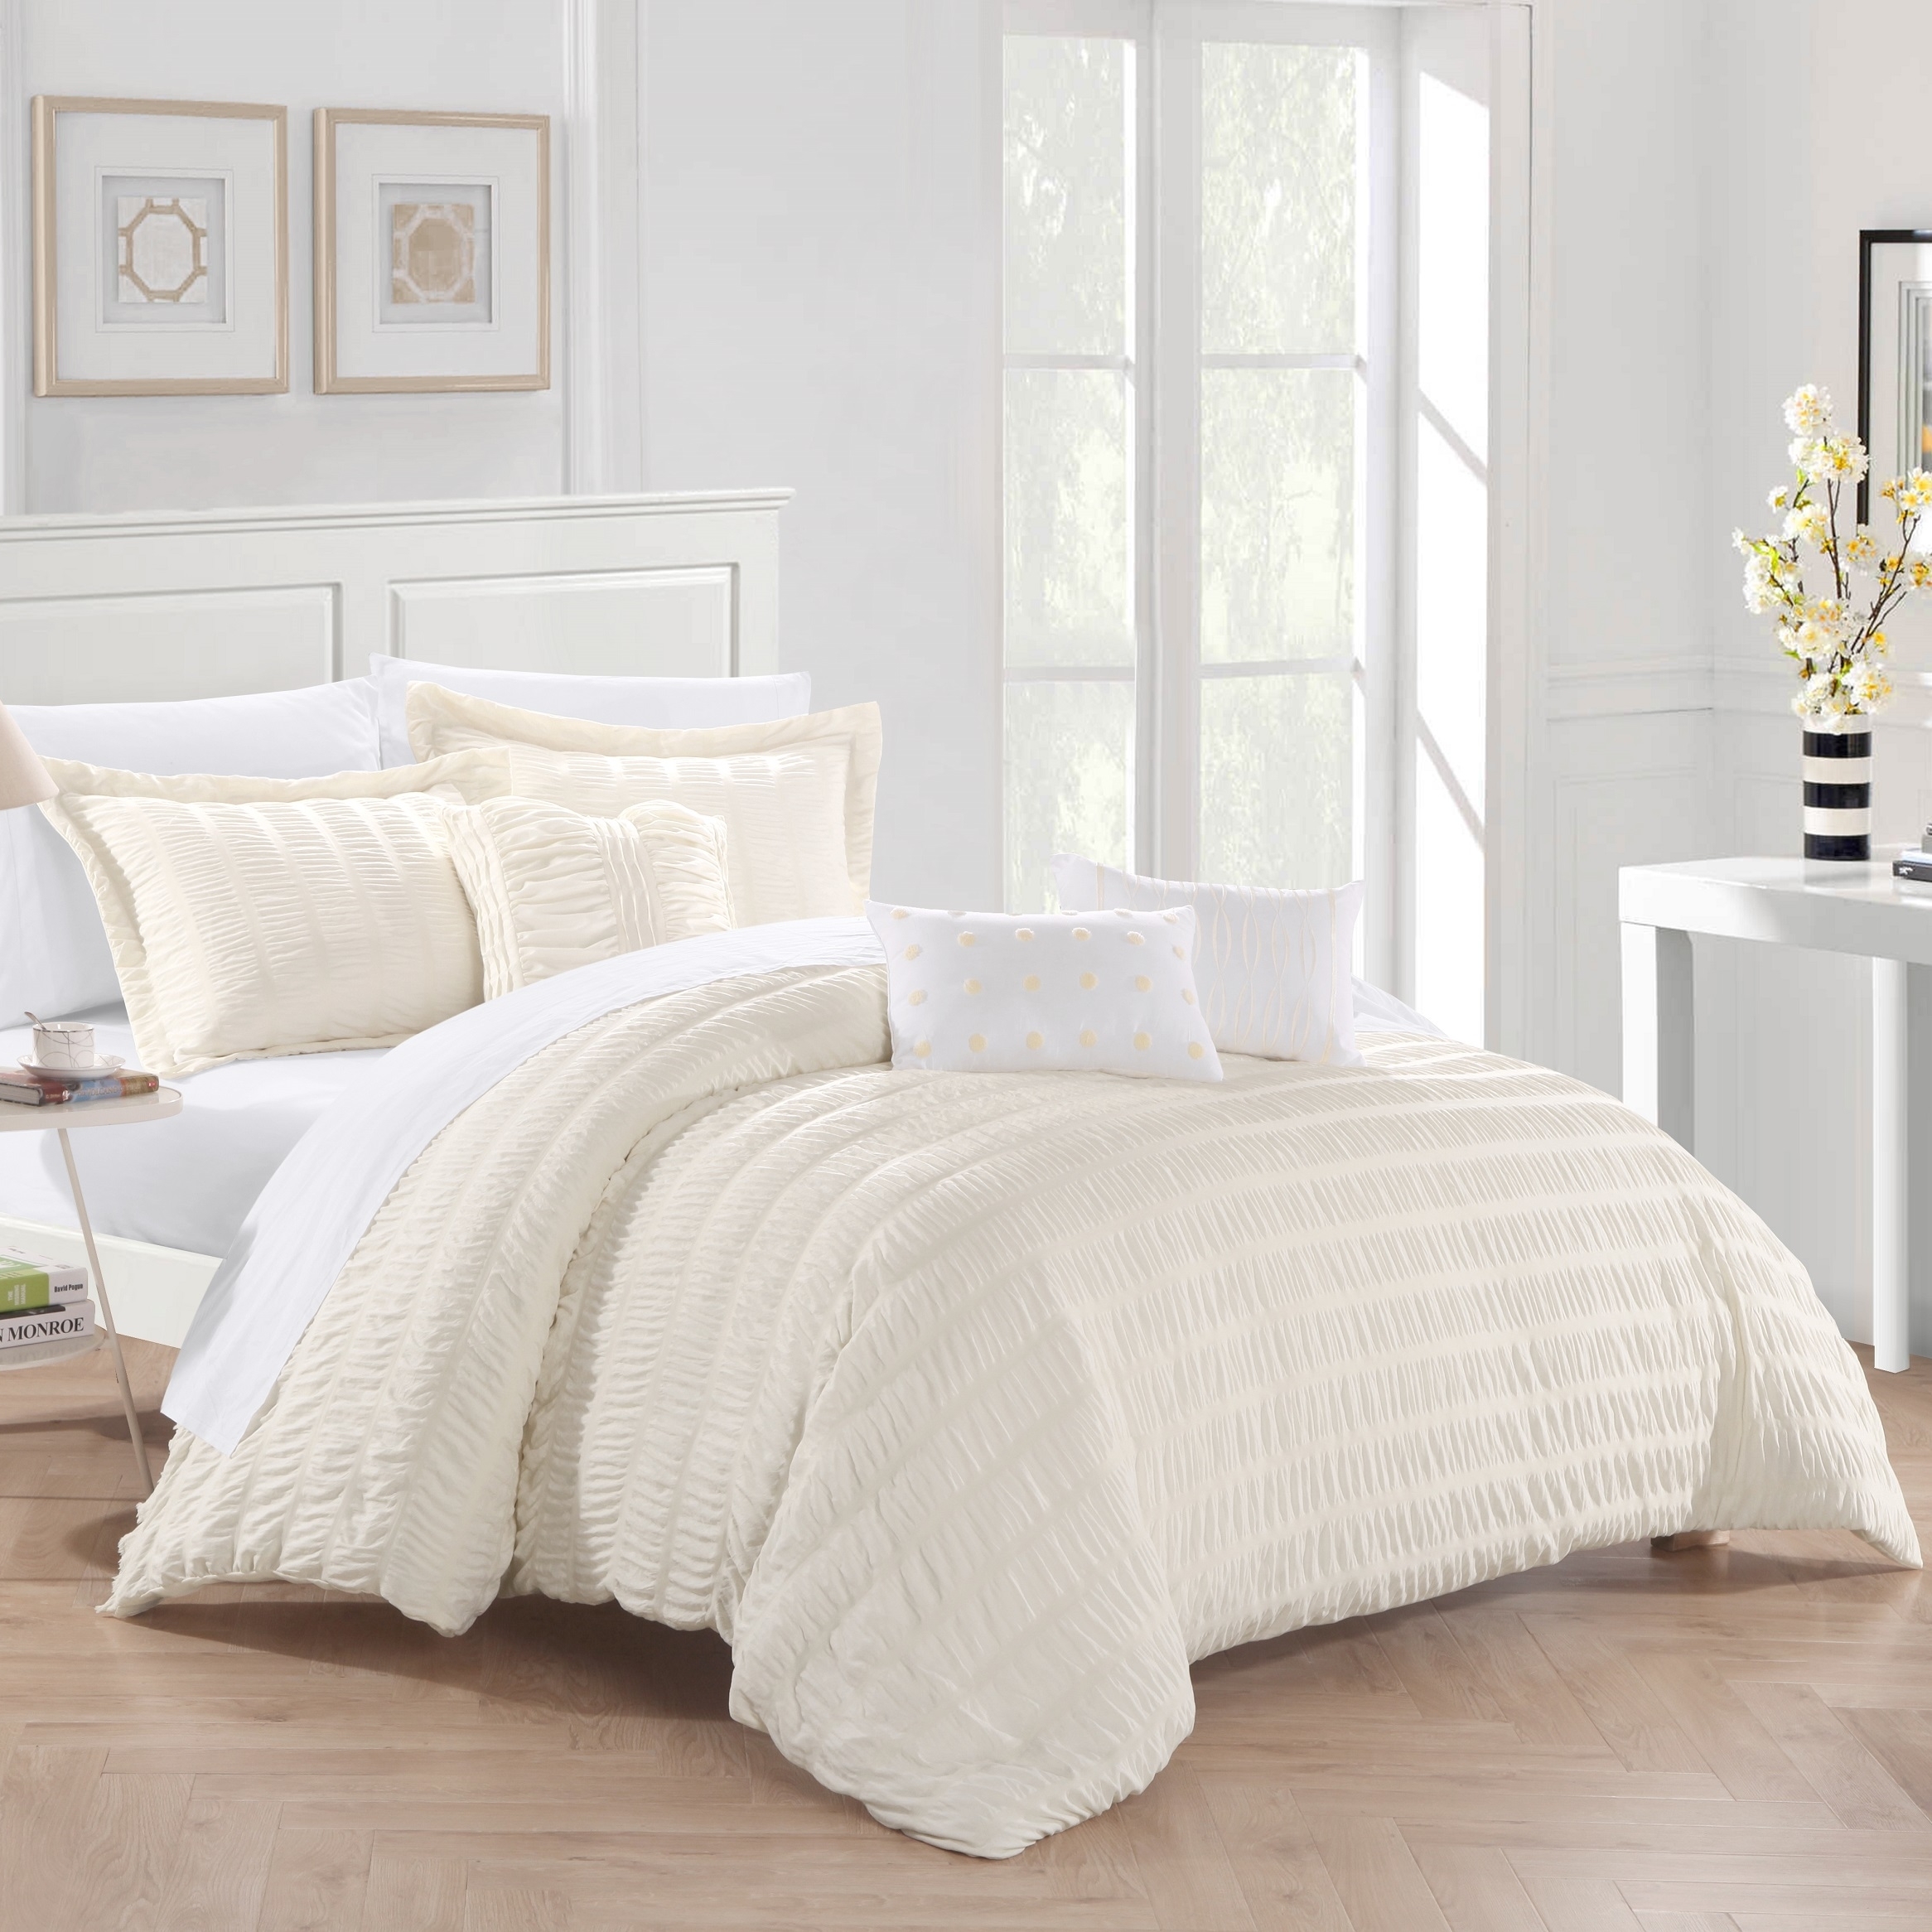 Daza 6 Or 5 Piece Comforter Set Striped Ruched Ruffled Bedding - Beige, King